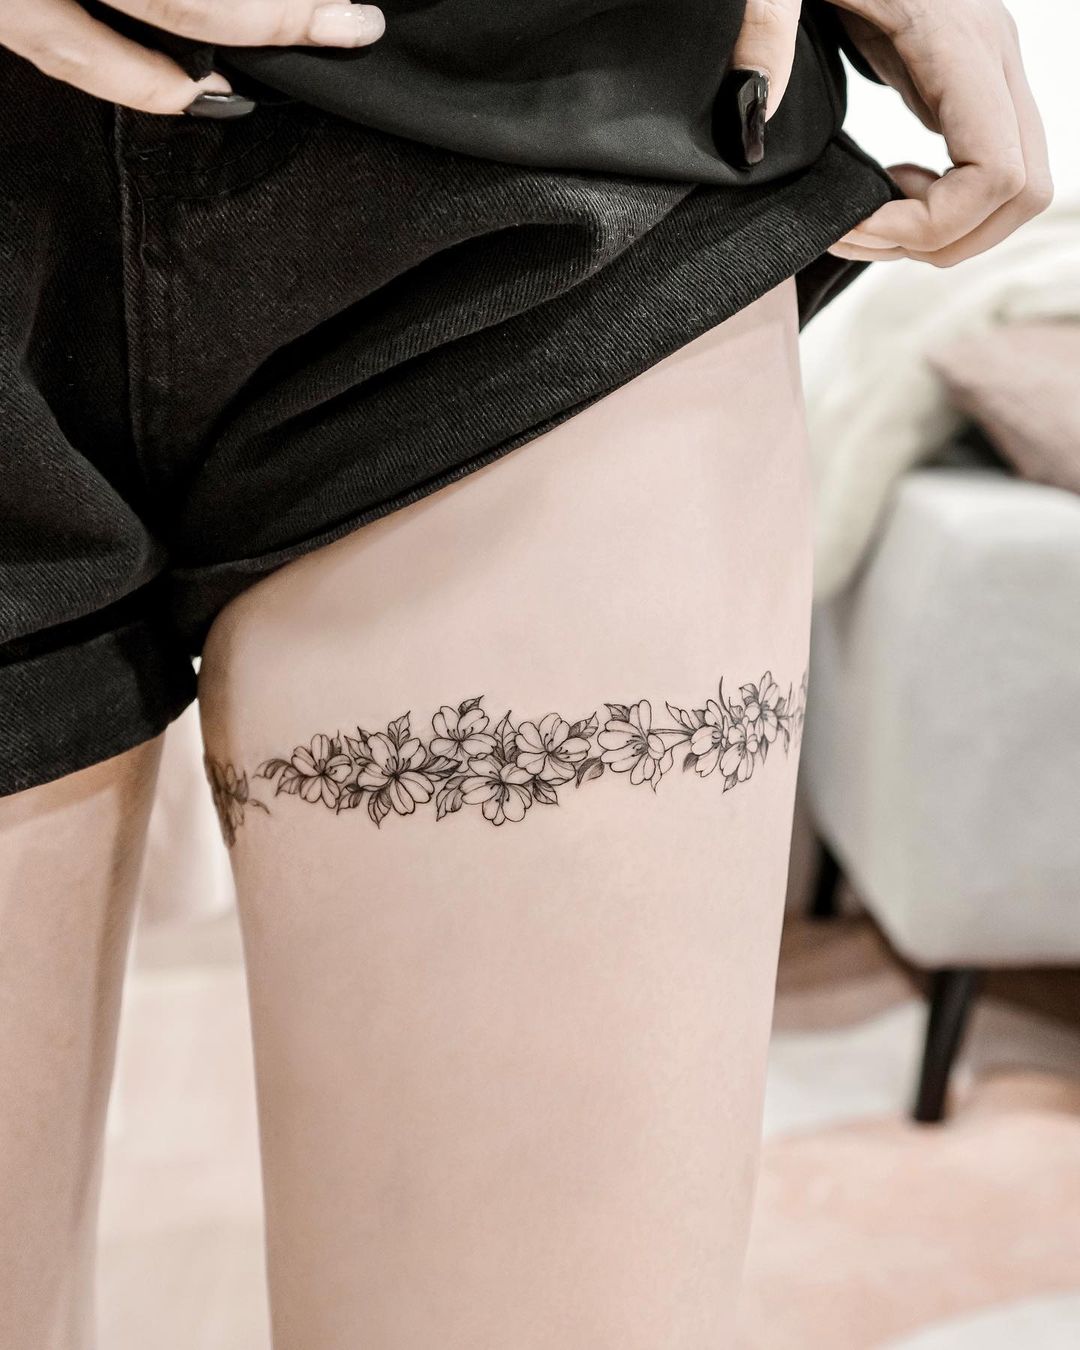 40 Sexy Thigh Tattoos For Women You Will Fall In Love